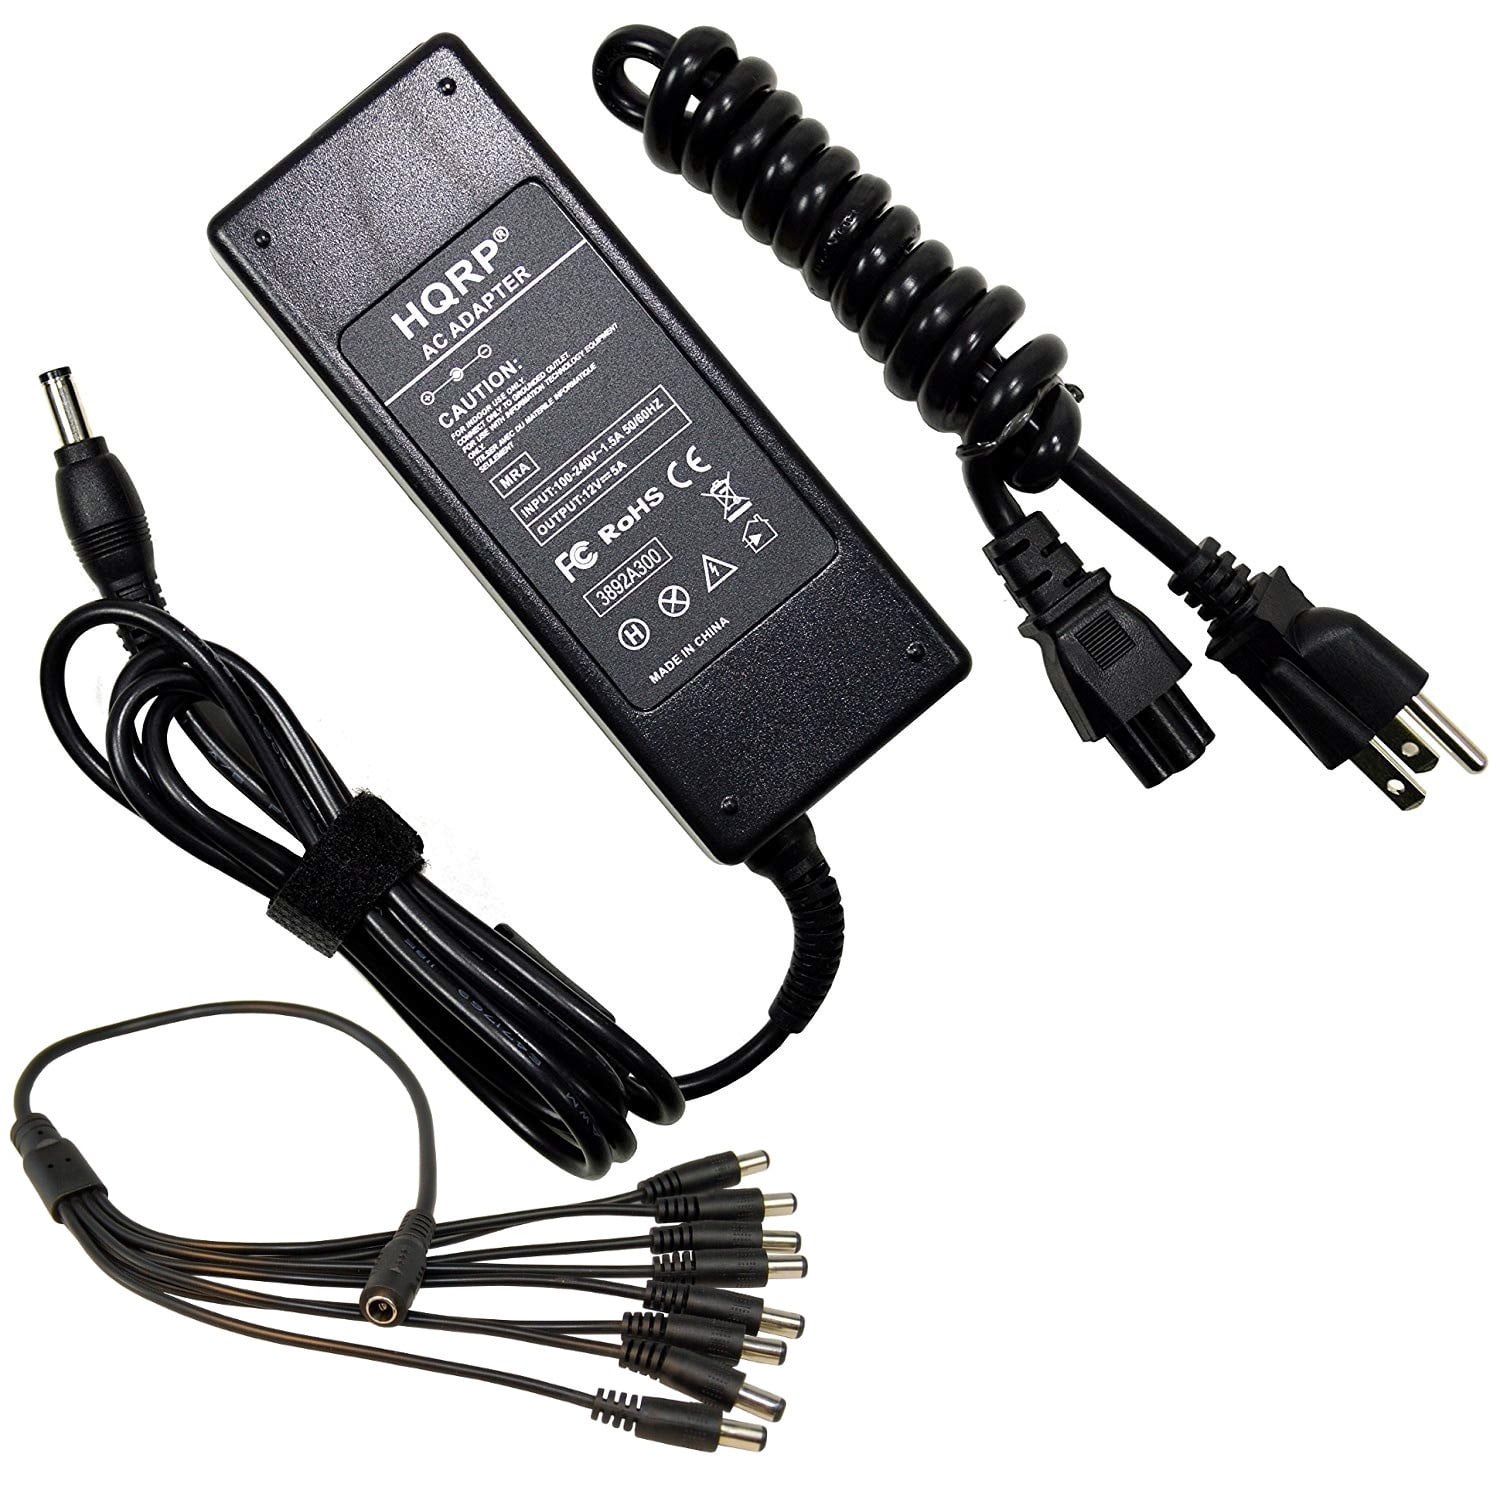 DC 12V 5A Power Supply AC Adapter Charger 8 Split Power Cable For CCTV Camera 